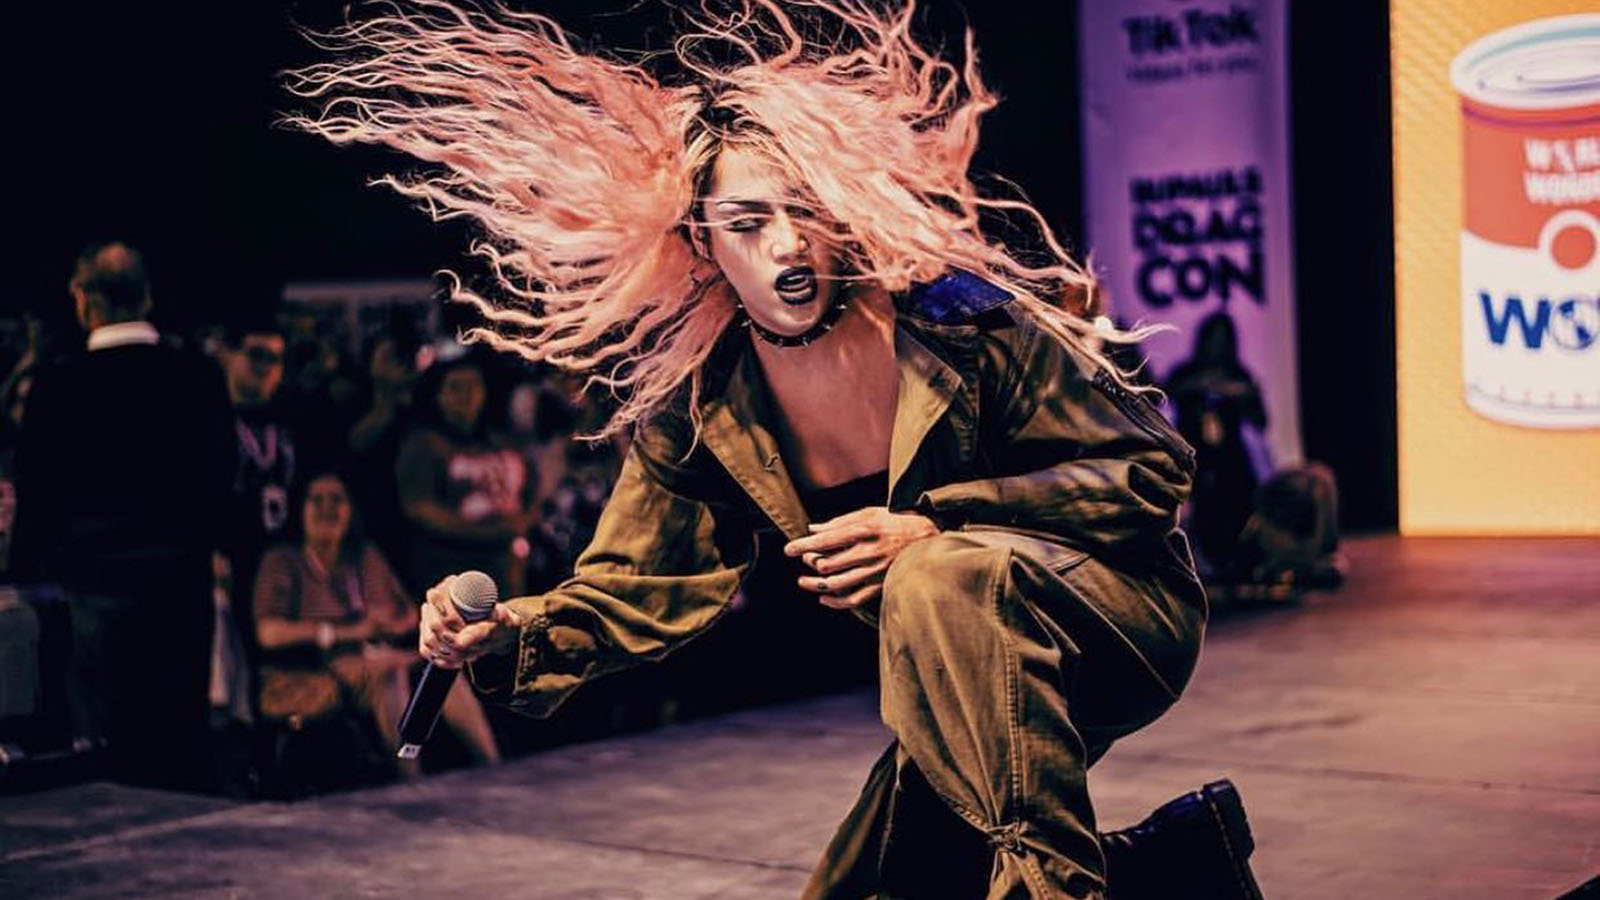 Adore DeLano performs on stage—pink, long hair thrashing behind her